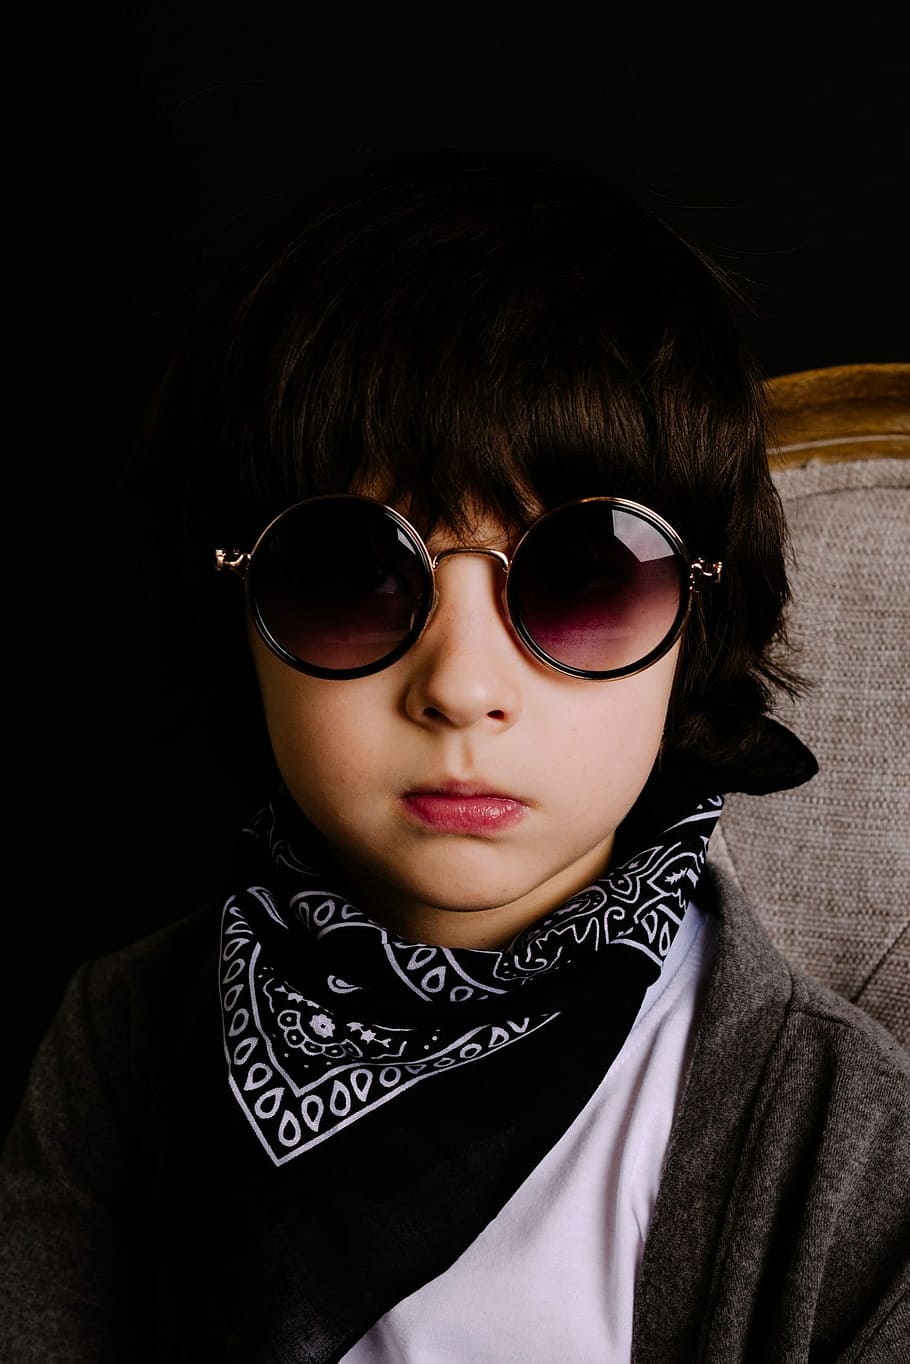 boy taking selfie with round black sunglasses with black frames